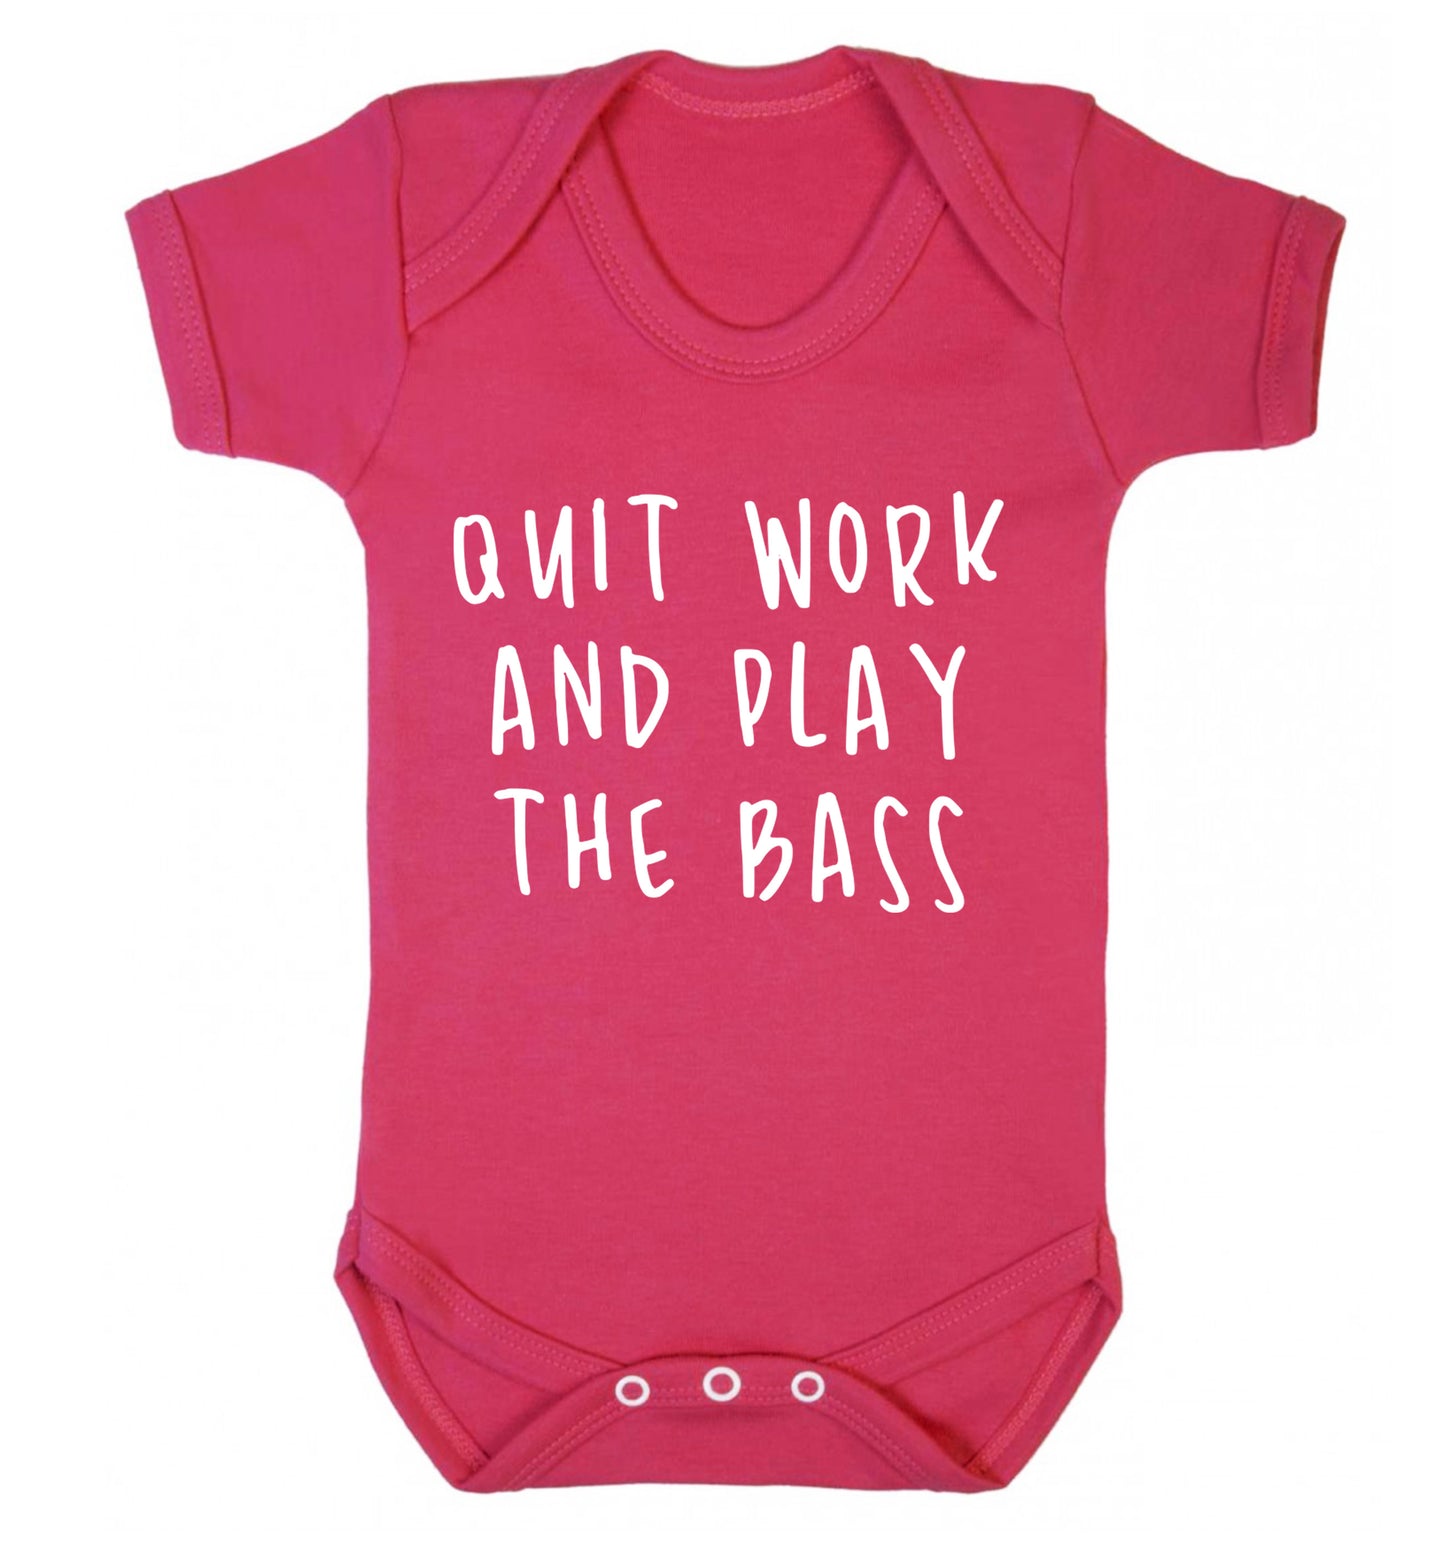 Quit work and play the bass Baby Vest dark pink 18-24 months